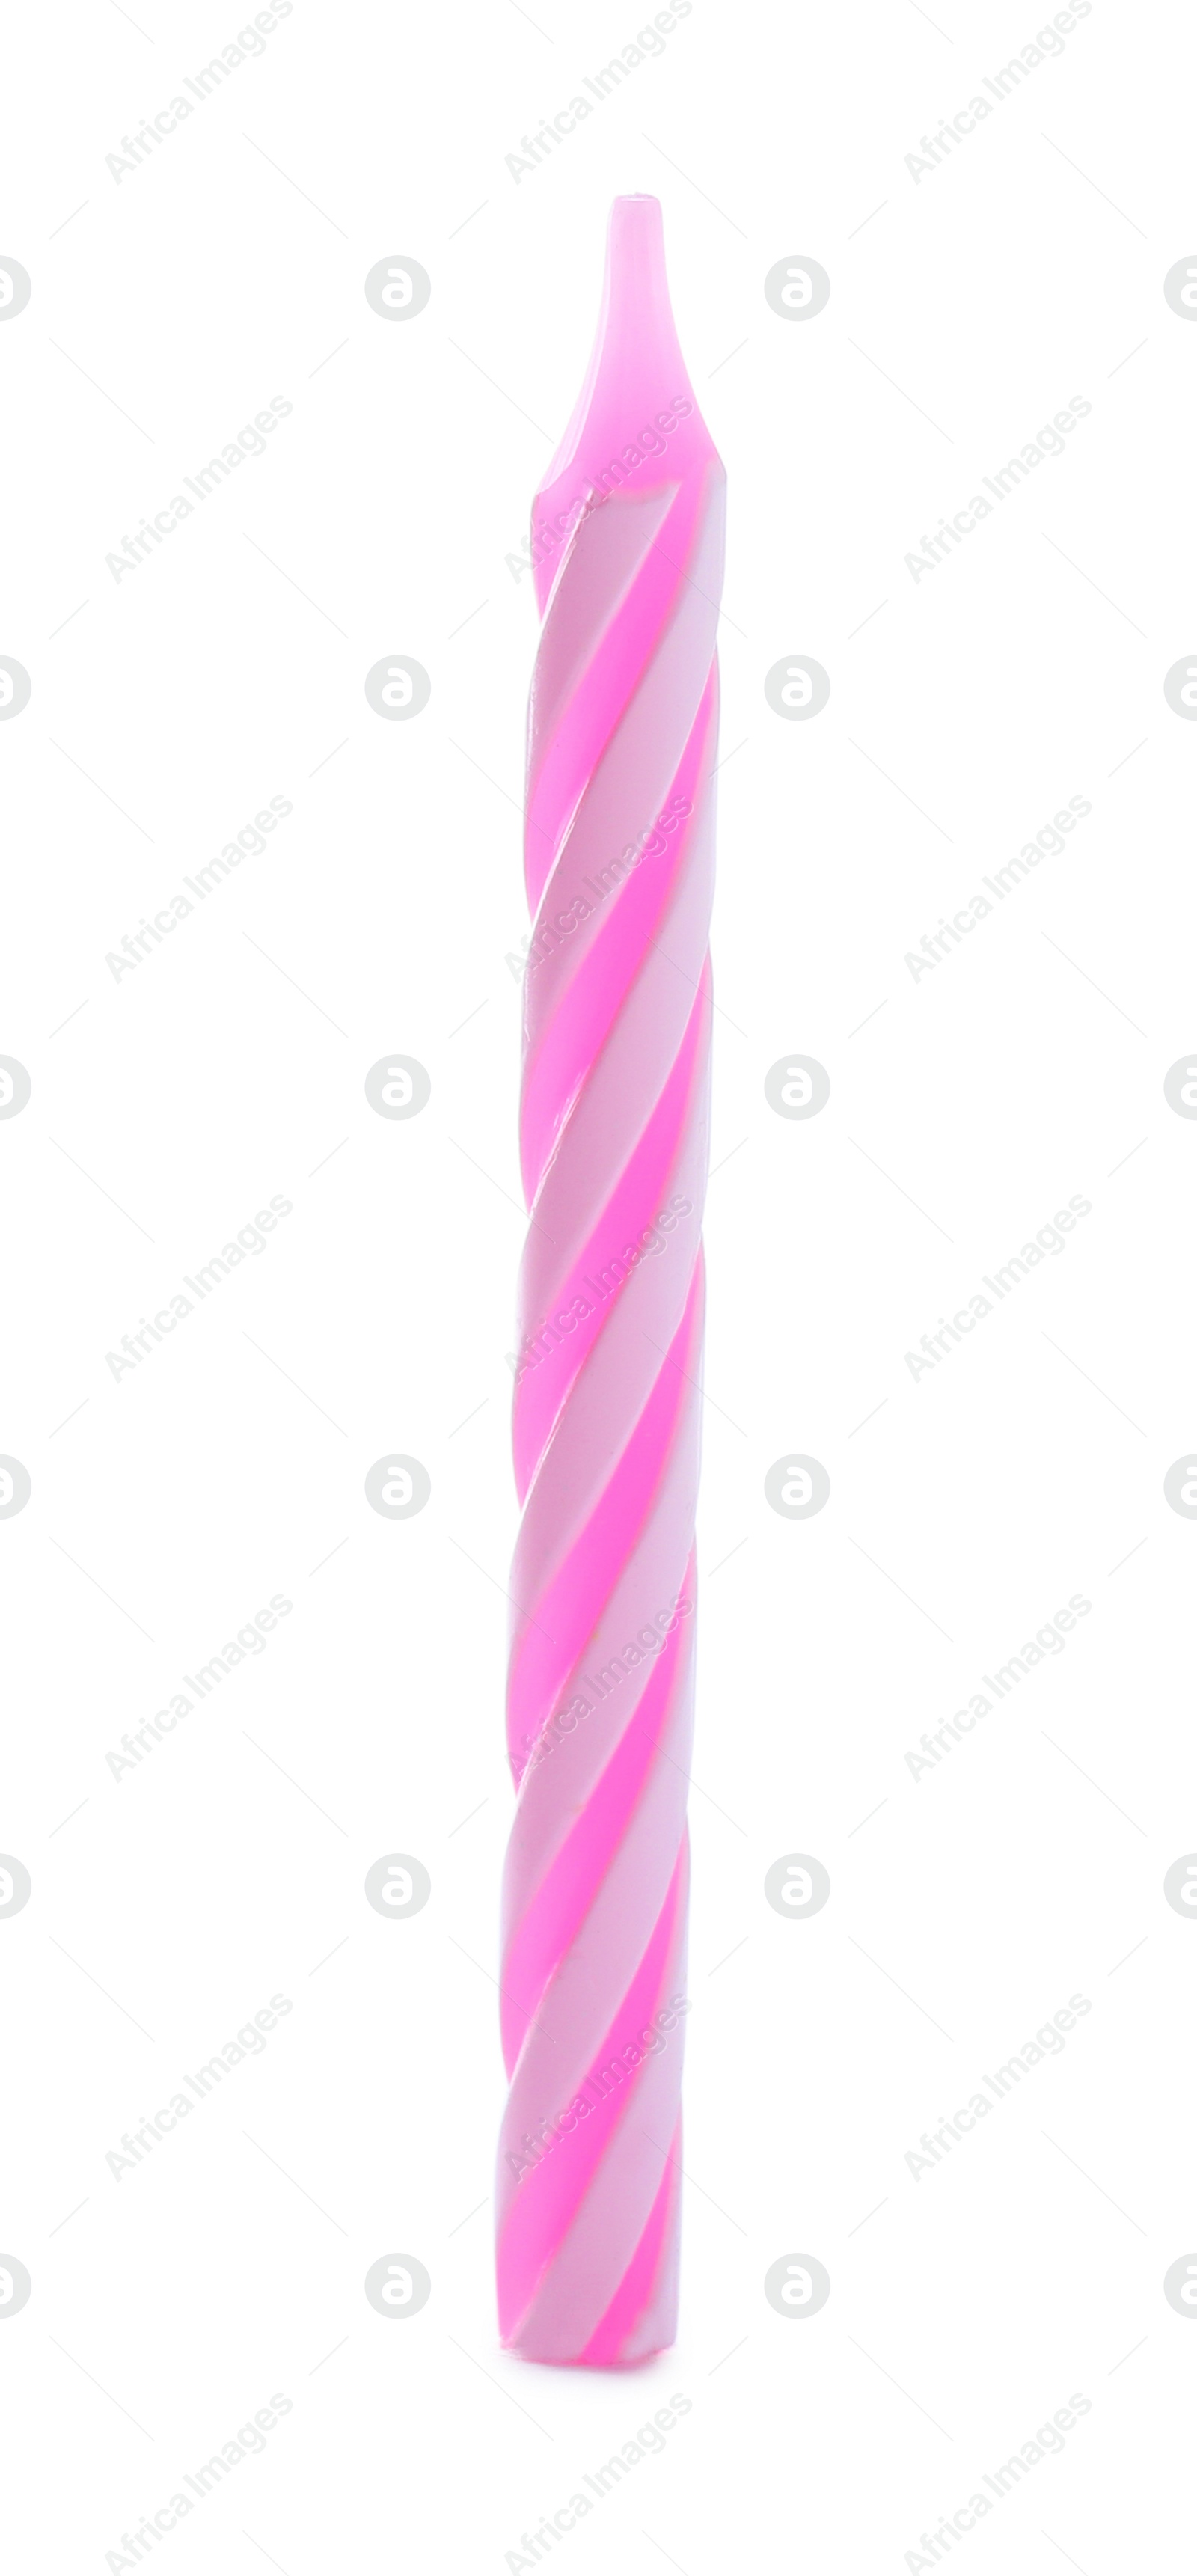 Photo of Pink striped birthday candle isolated on white